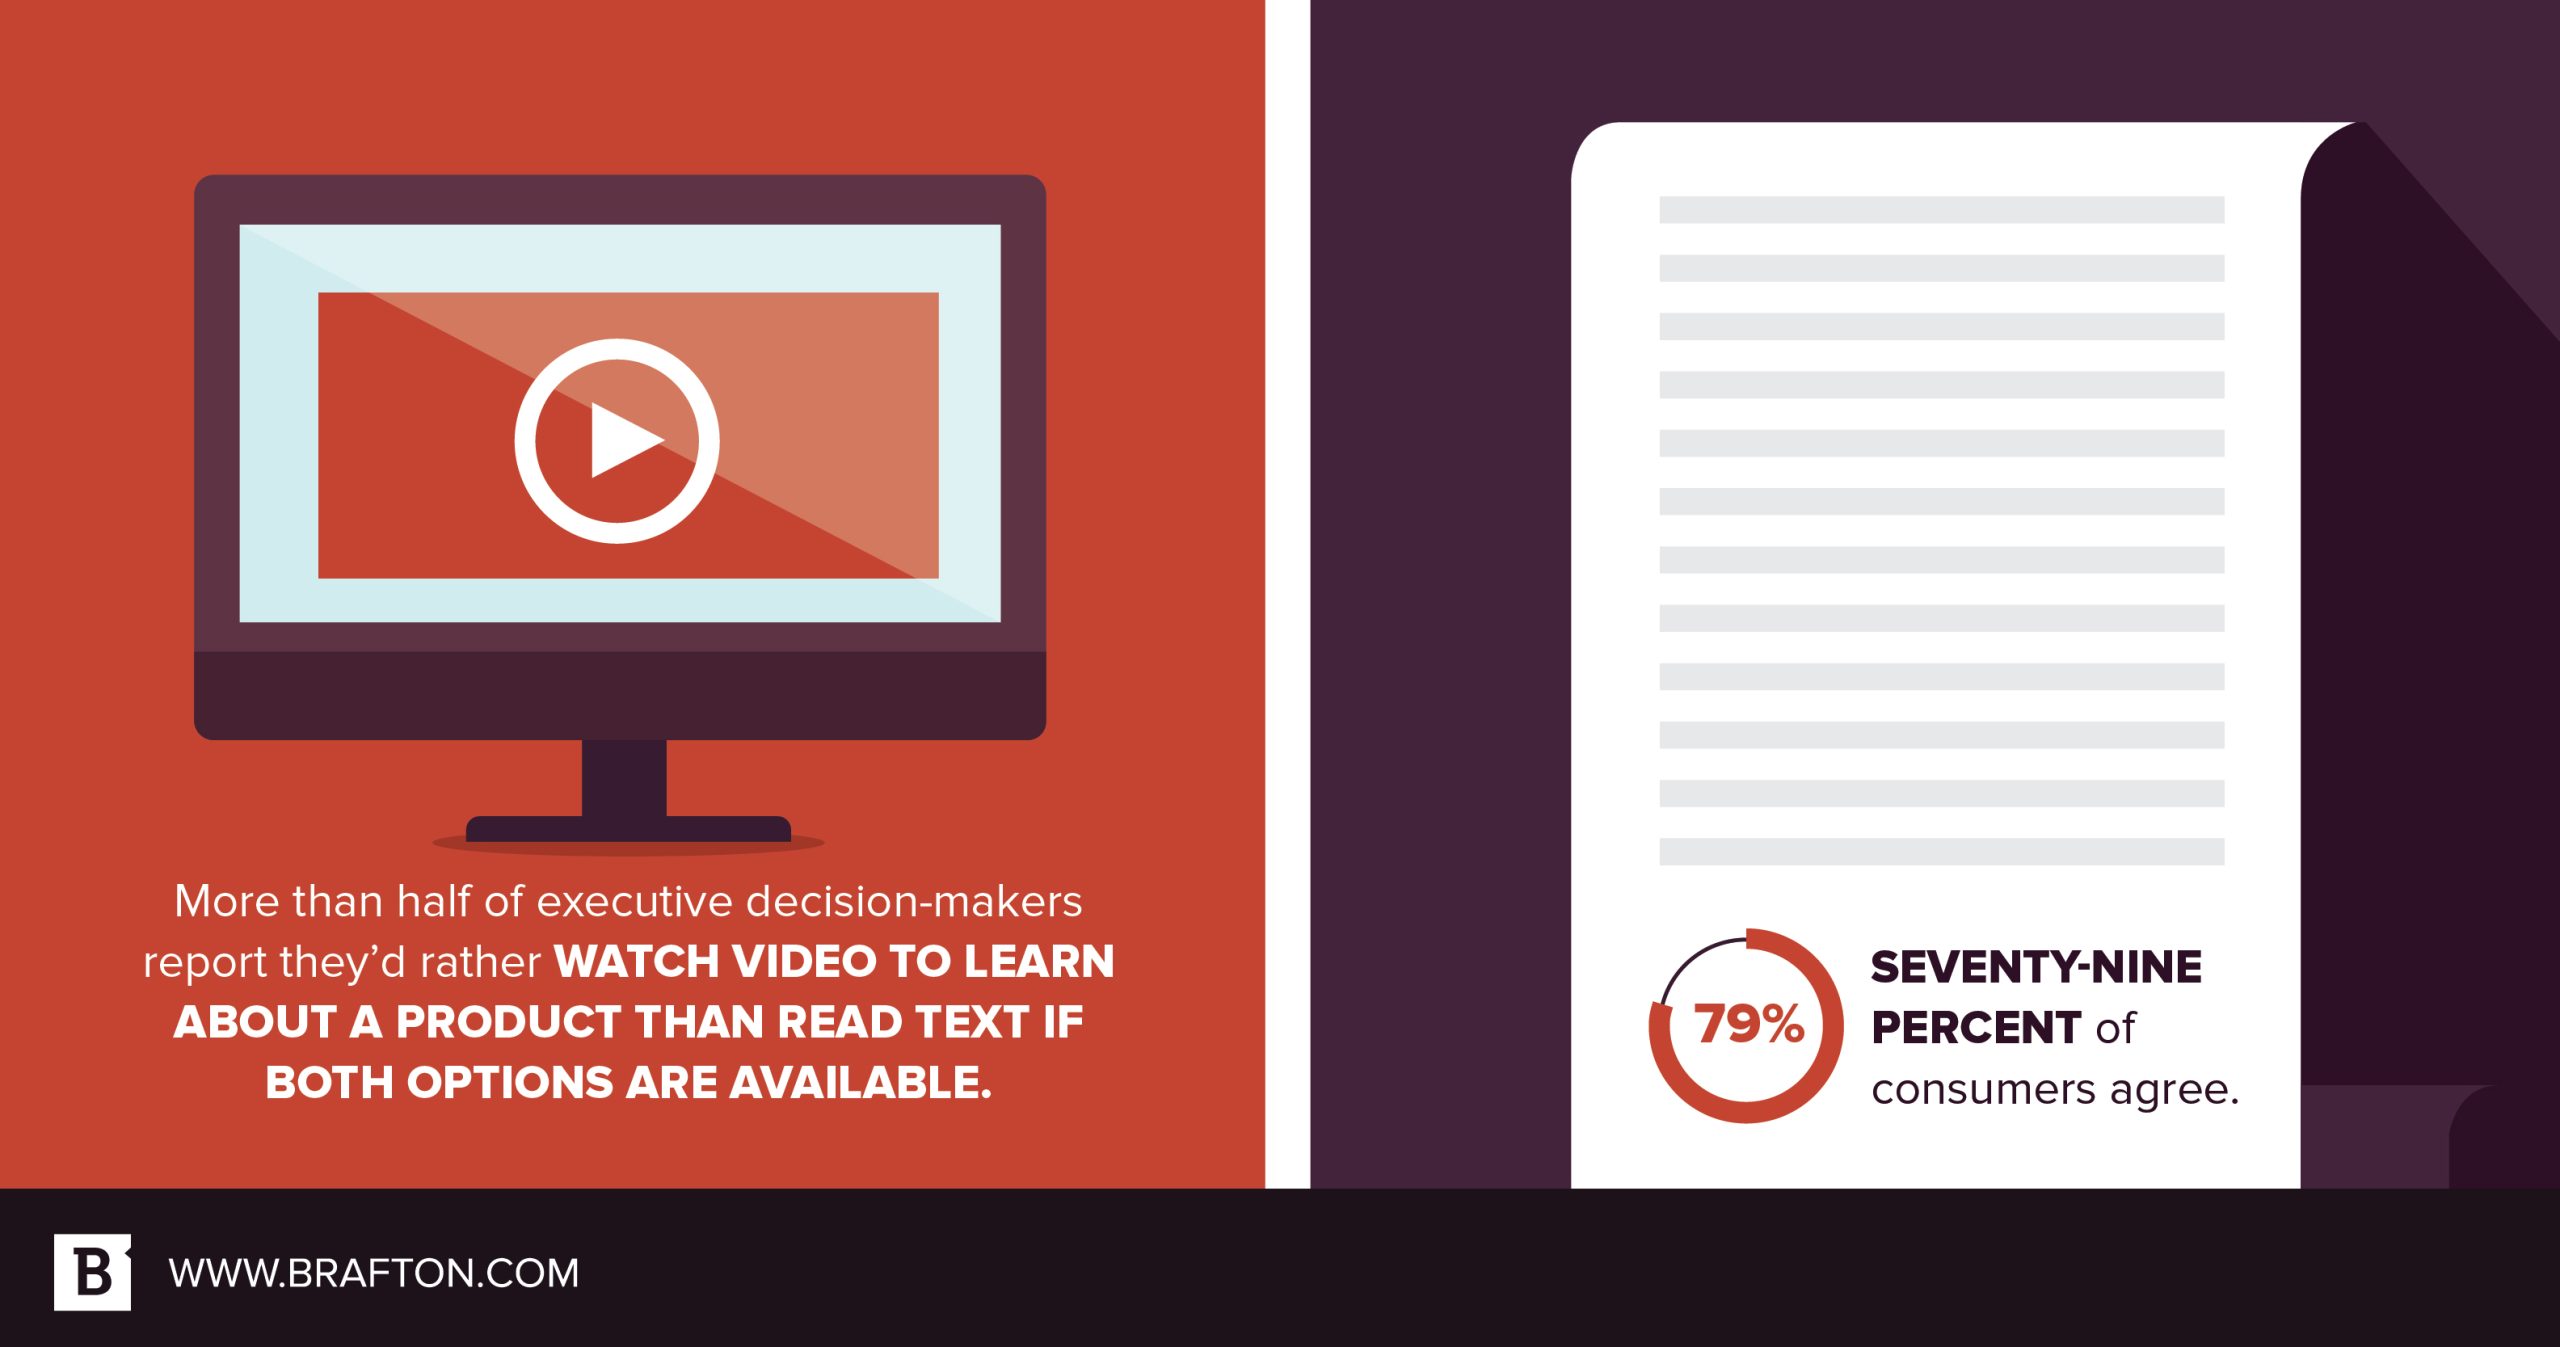 Most prospects would rather engage with video marketing.